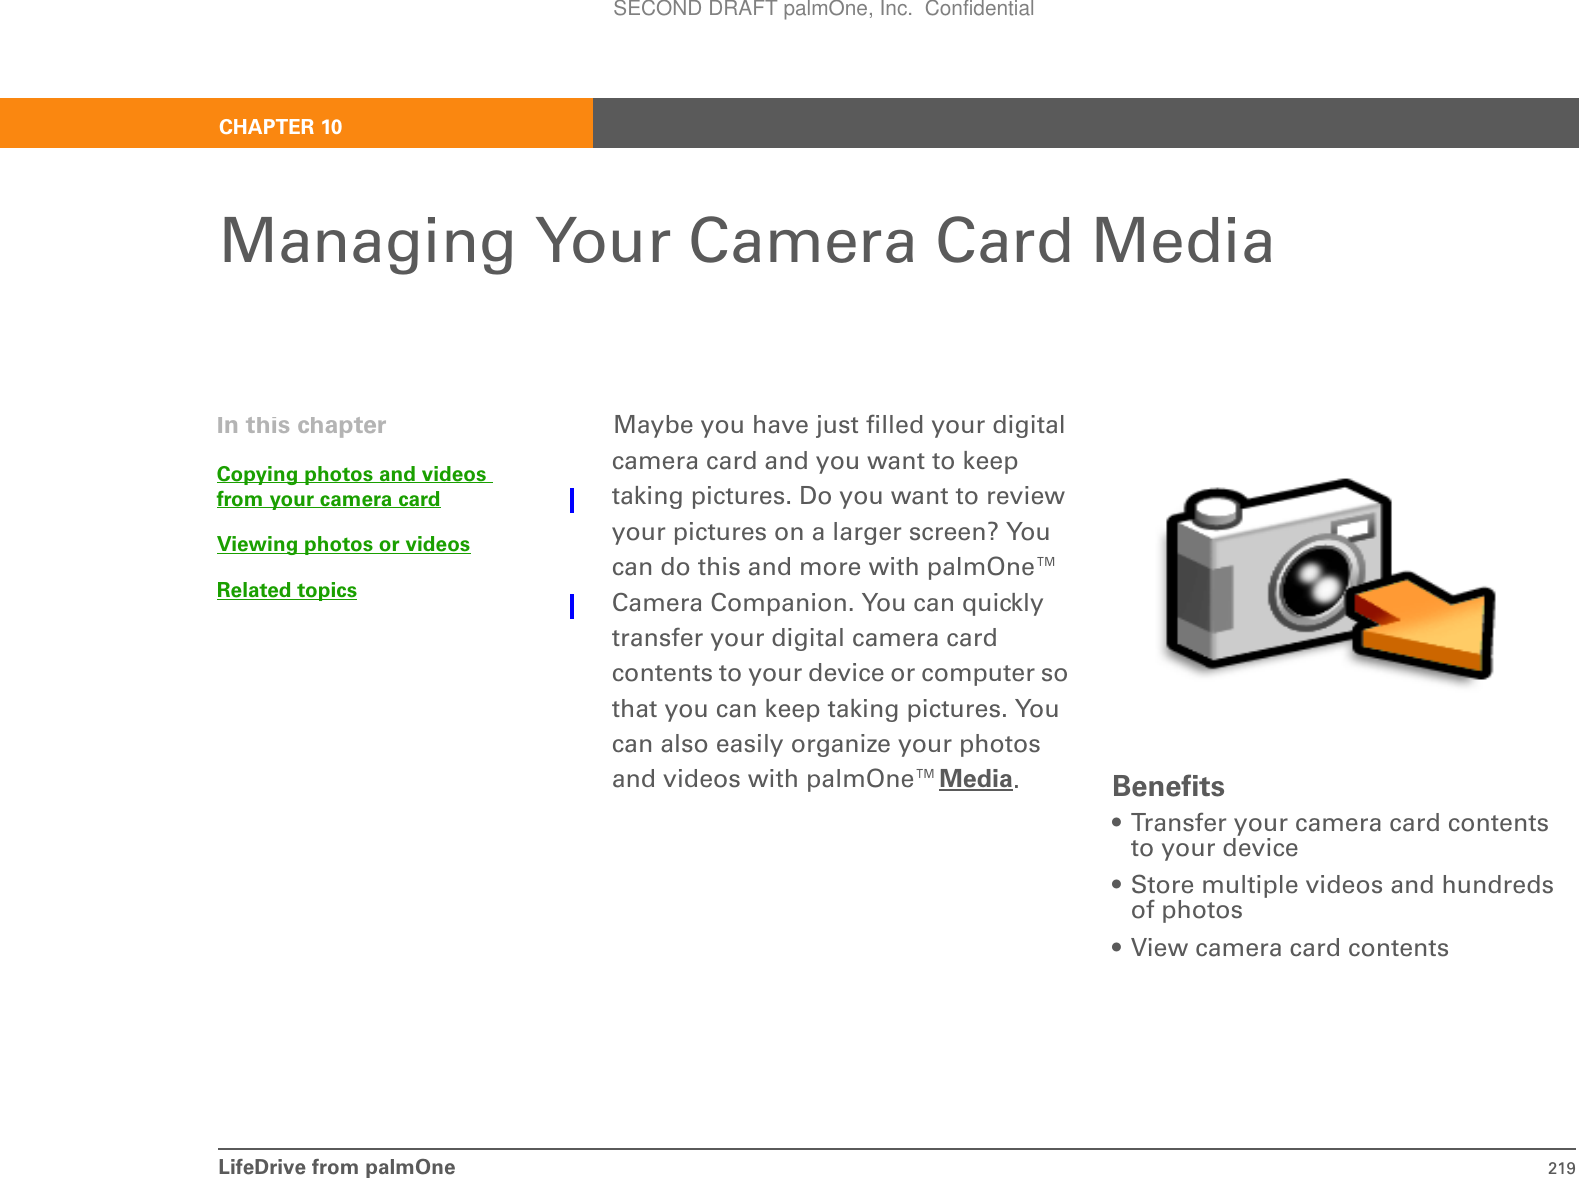 LifeDrive from palmOne 219CHAPTER 10Managing Your Camera Card MediaMaybe you have just filled your digital camera card and you want to keep taking pictures. Do you want to review your pictures on a larger screen? You can do this and more with palmOne™ Camera Companion. You can quickly transfer your digital camera card contents to your device or computer so that you can keep taking pictures. You can also easily organize your photos and videos with palmOne™Media.Benefits• Transfer your camera card contents to your device• Store multiple videos and hundreds of photos• View camera card contentsIn this chapterCopying photos and videos from your camera cardViewing photos or videosRelated topicsSECOND DRAFT palmOne, Inc.  Confidential